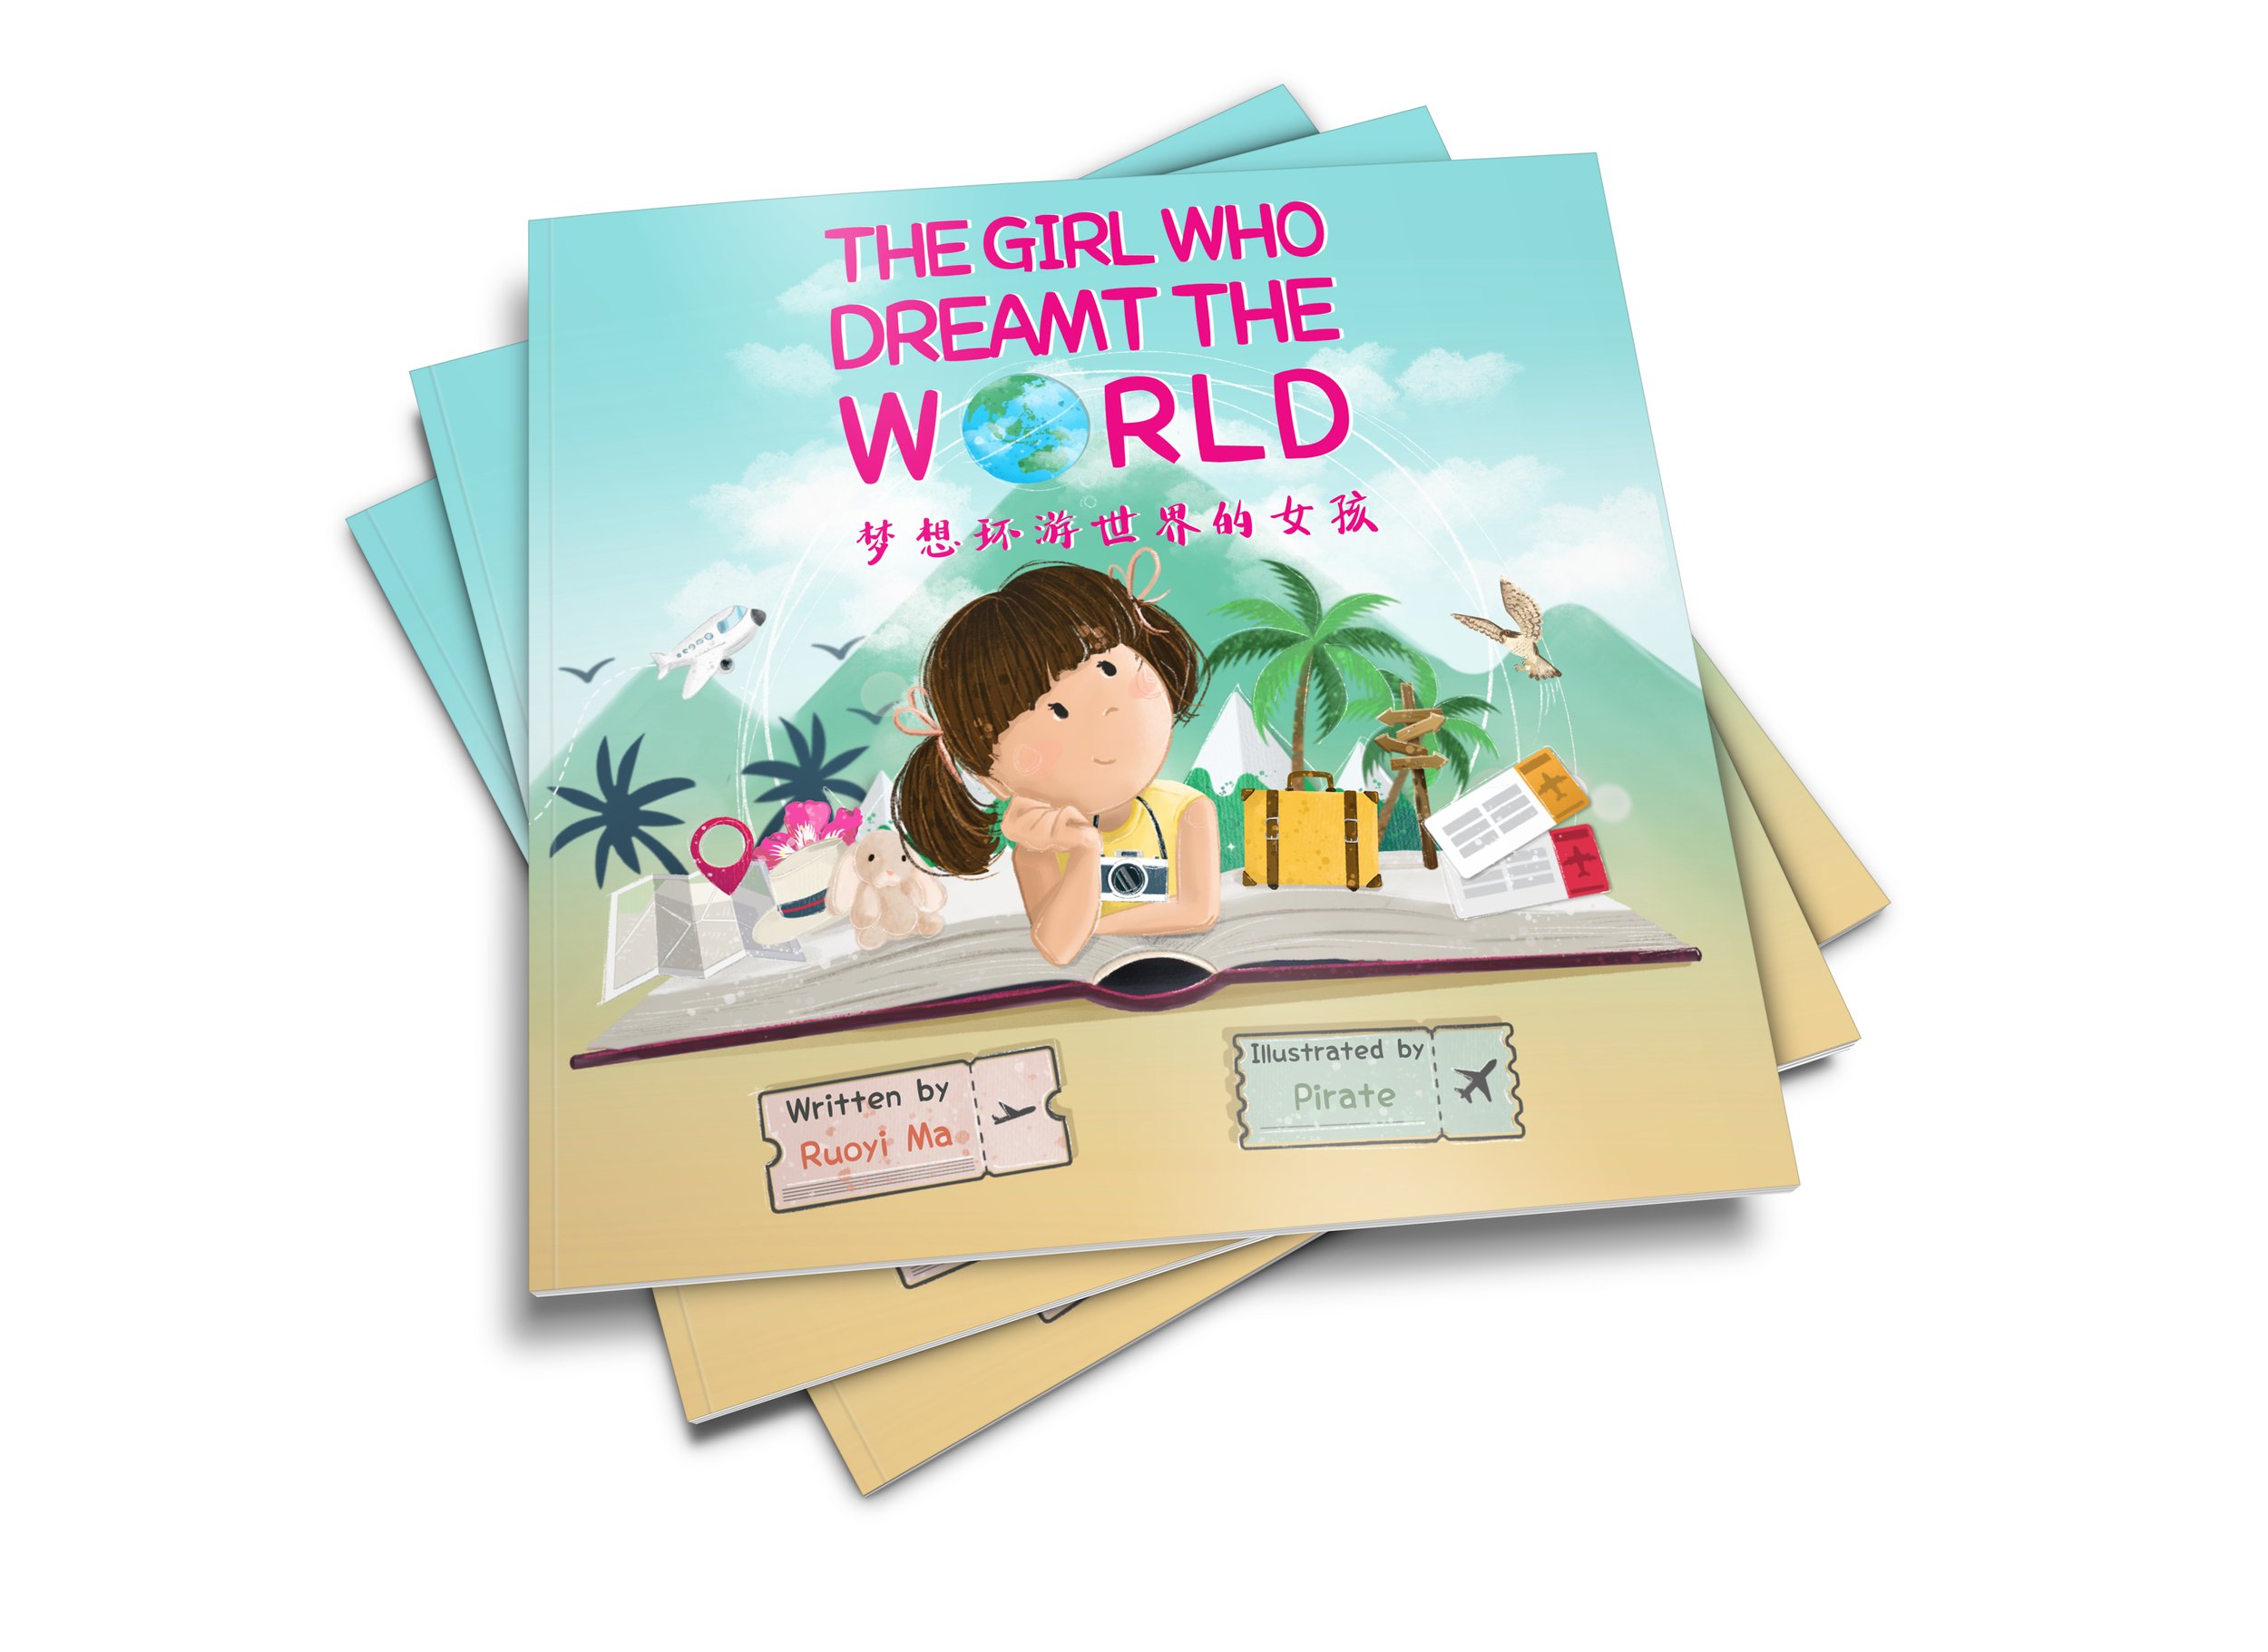 The girl who dreamt the world 001A.jpg